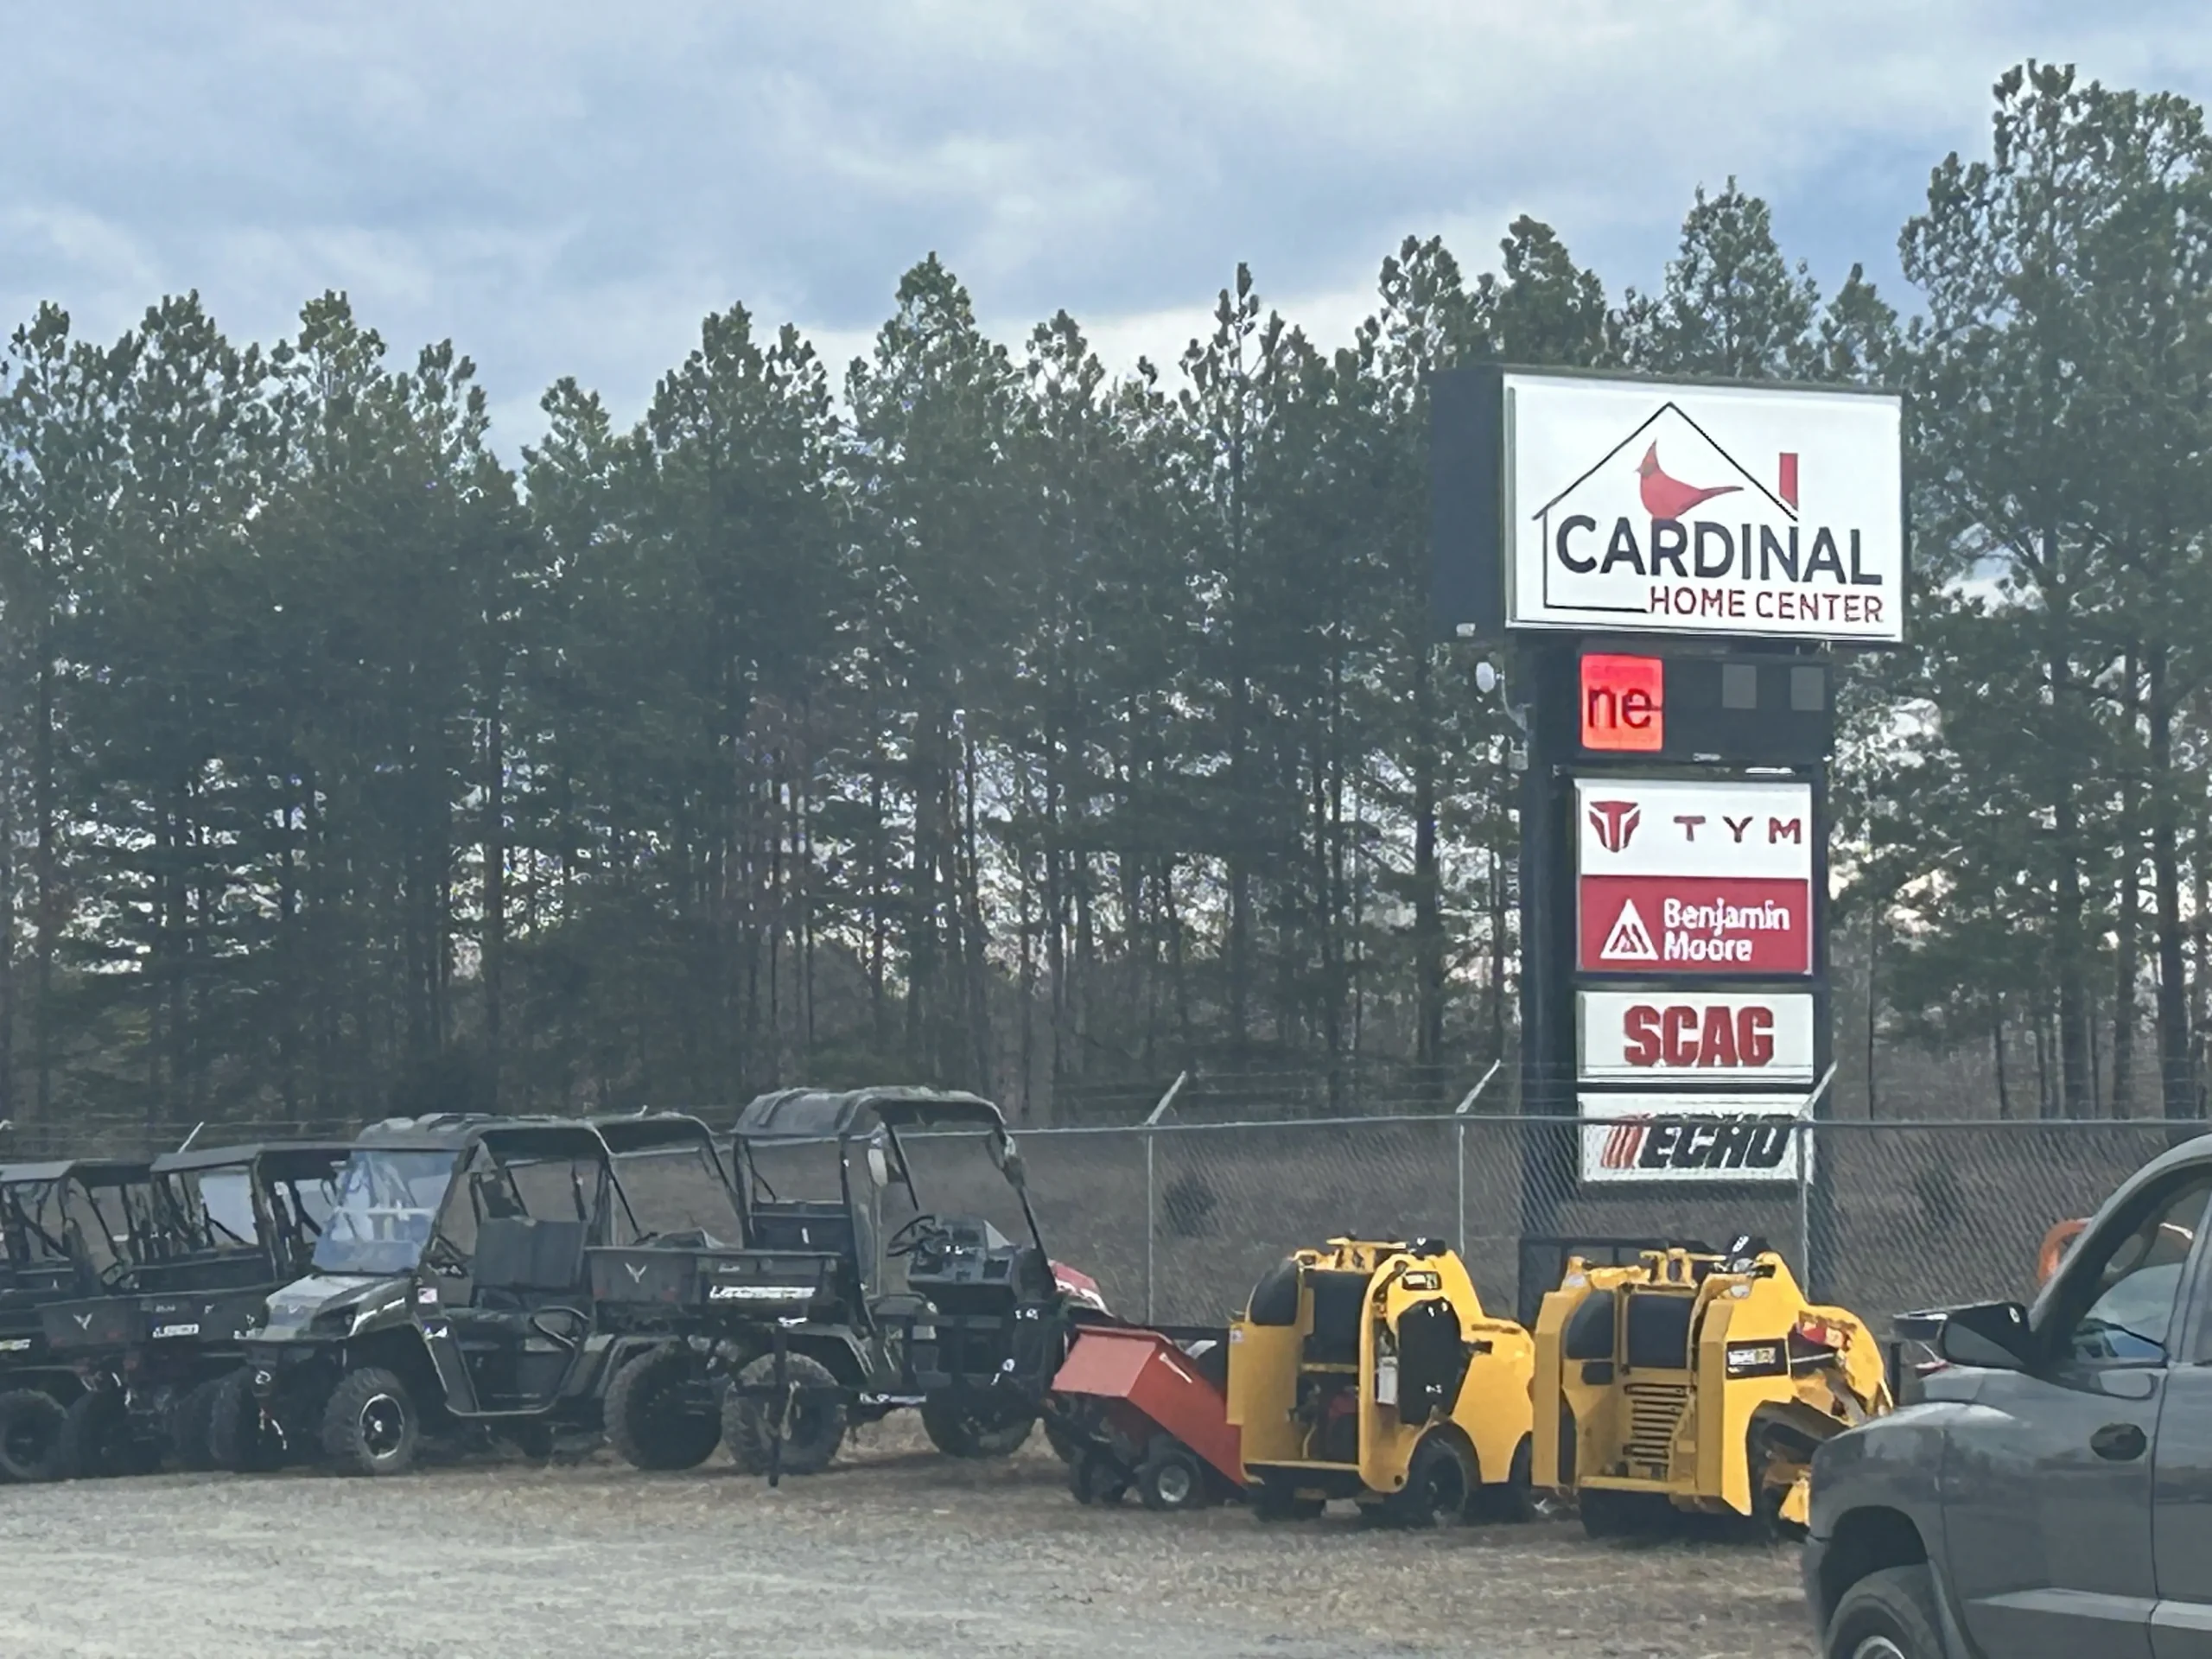 Featured image for “Lake Anna Tractor is Now Cardinal Home Center”